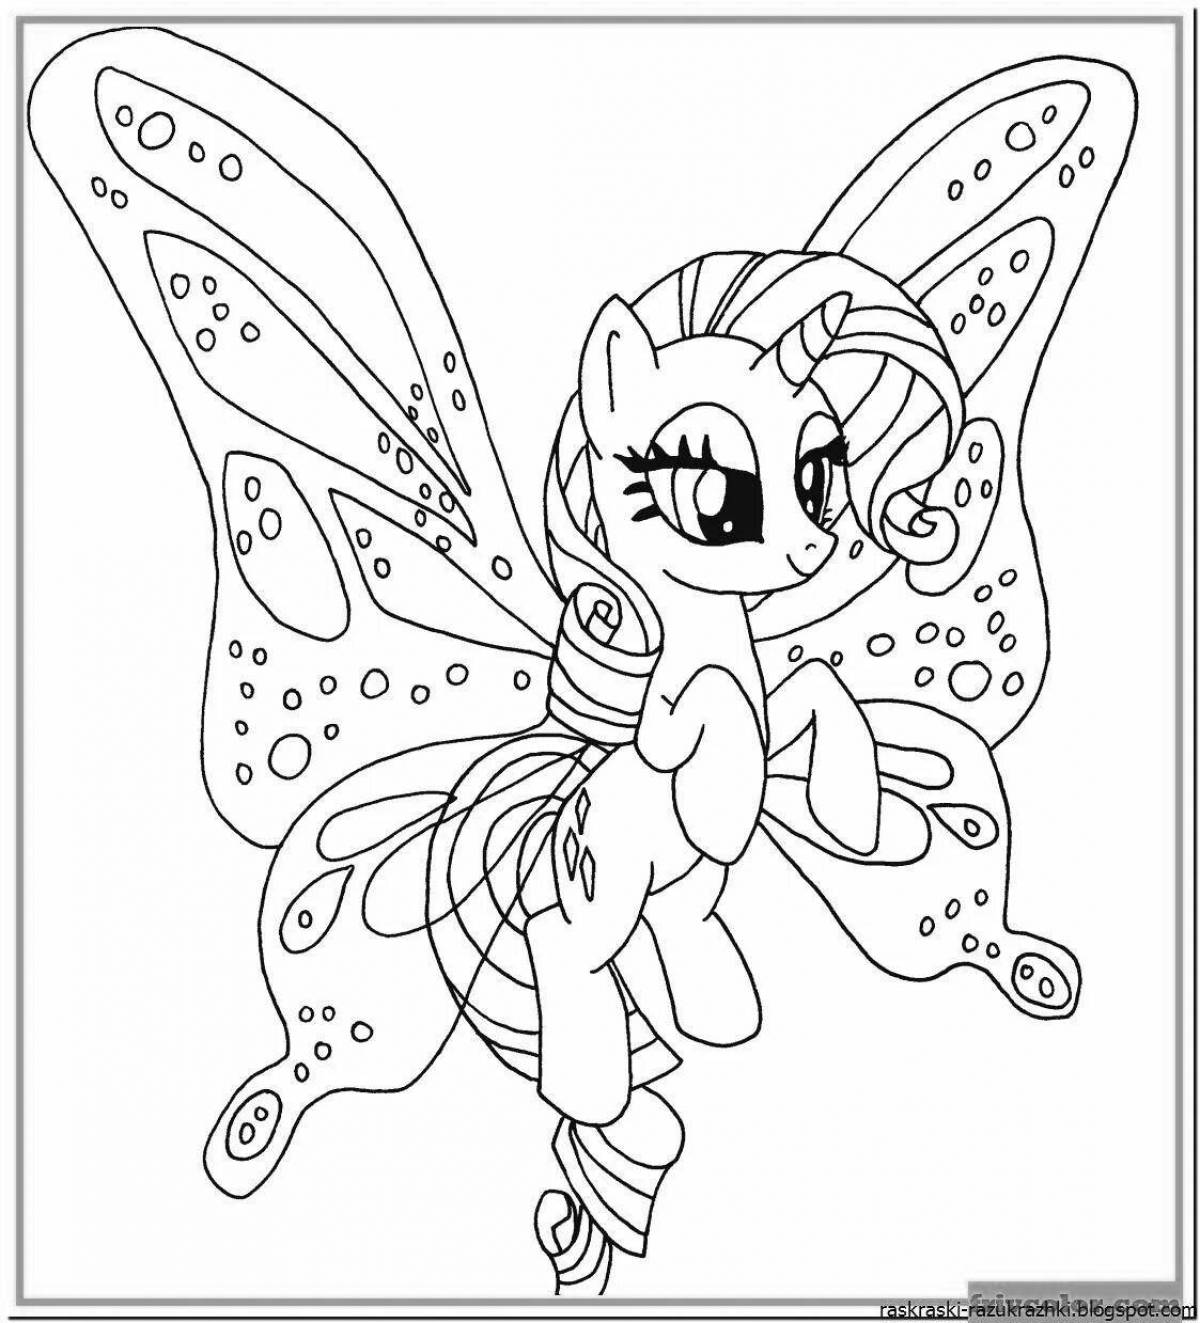 Adorable pony coloring page